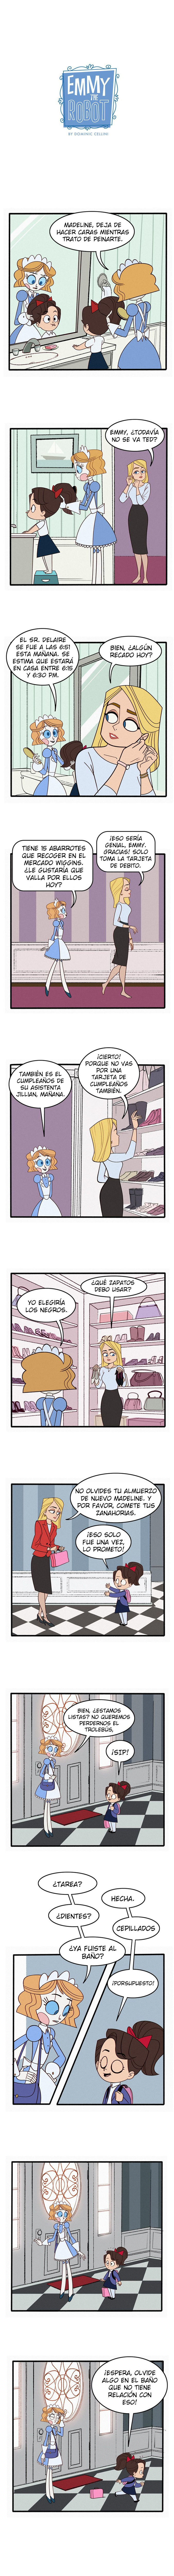 Emmy The Robot [Spanish] (Ongoing) 21